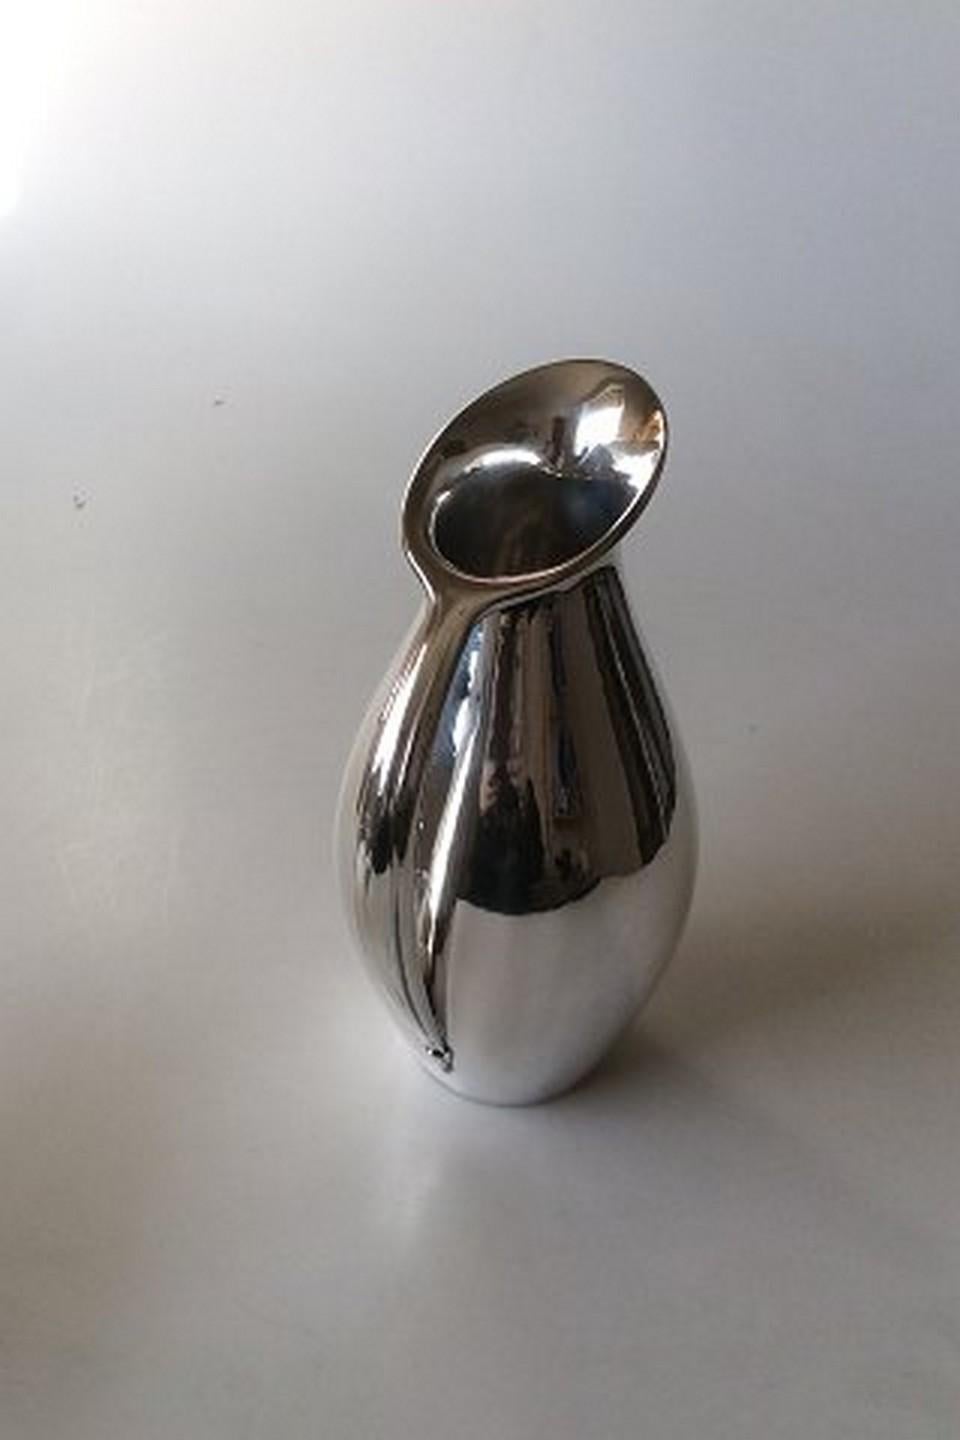 Georg Jensen sterling silver pitcher no. 432A. From after 1945.

Measure: 23 cm H. Weighs 511 g / 18 oz
Item no.: 266241.